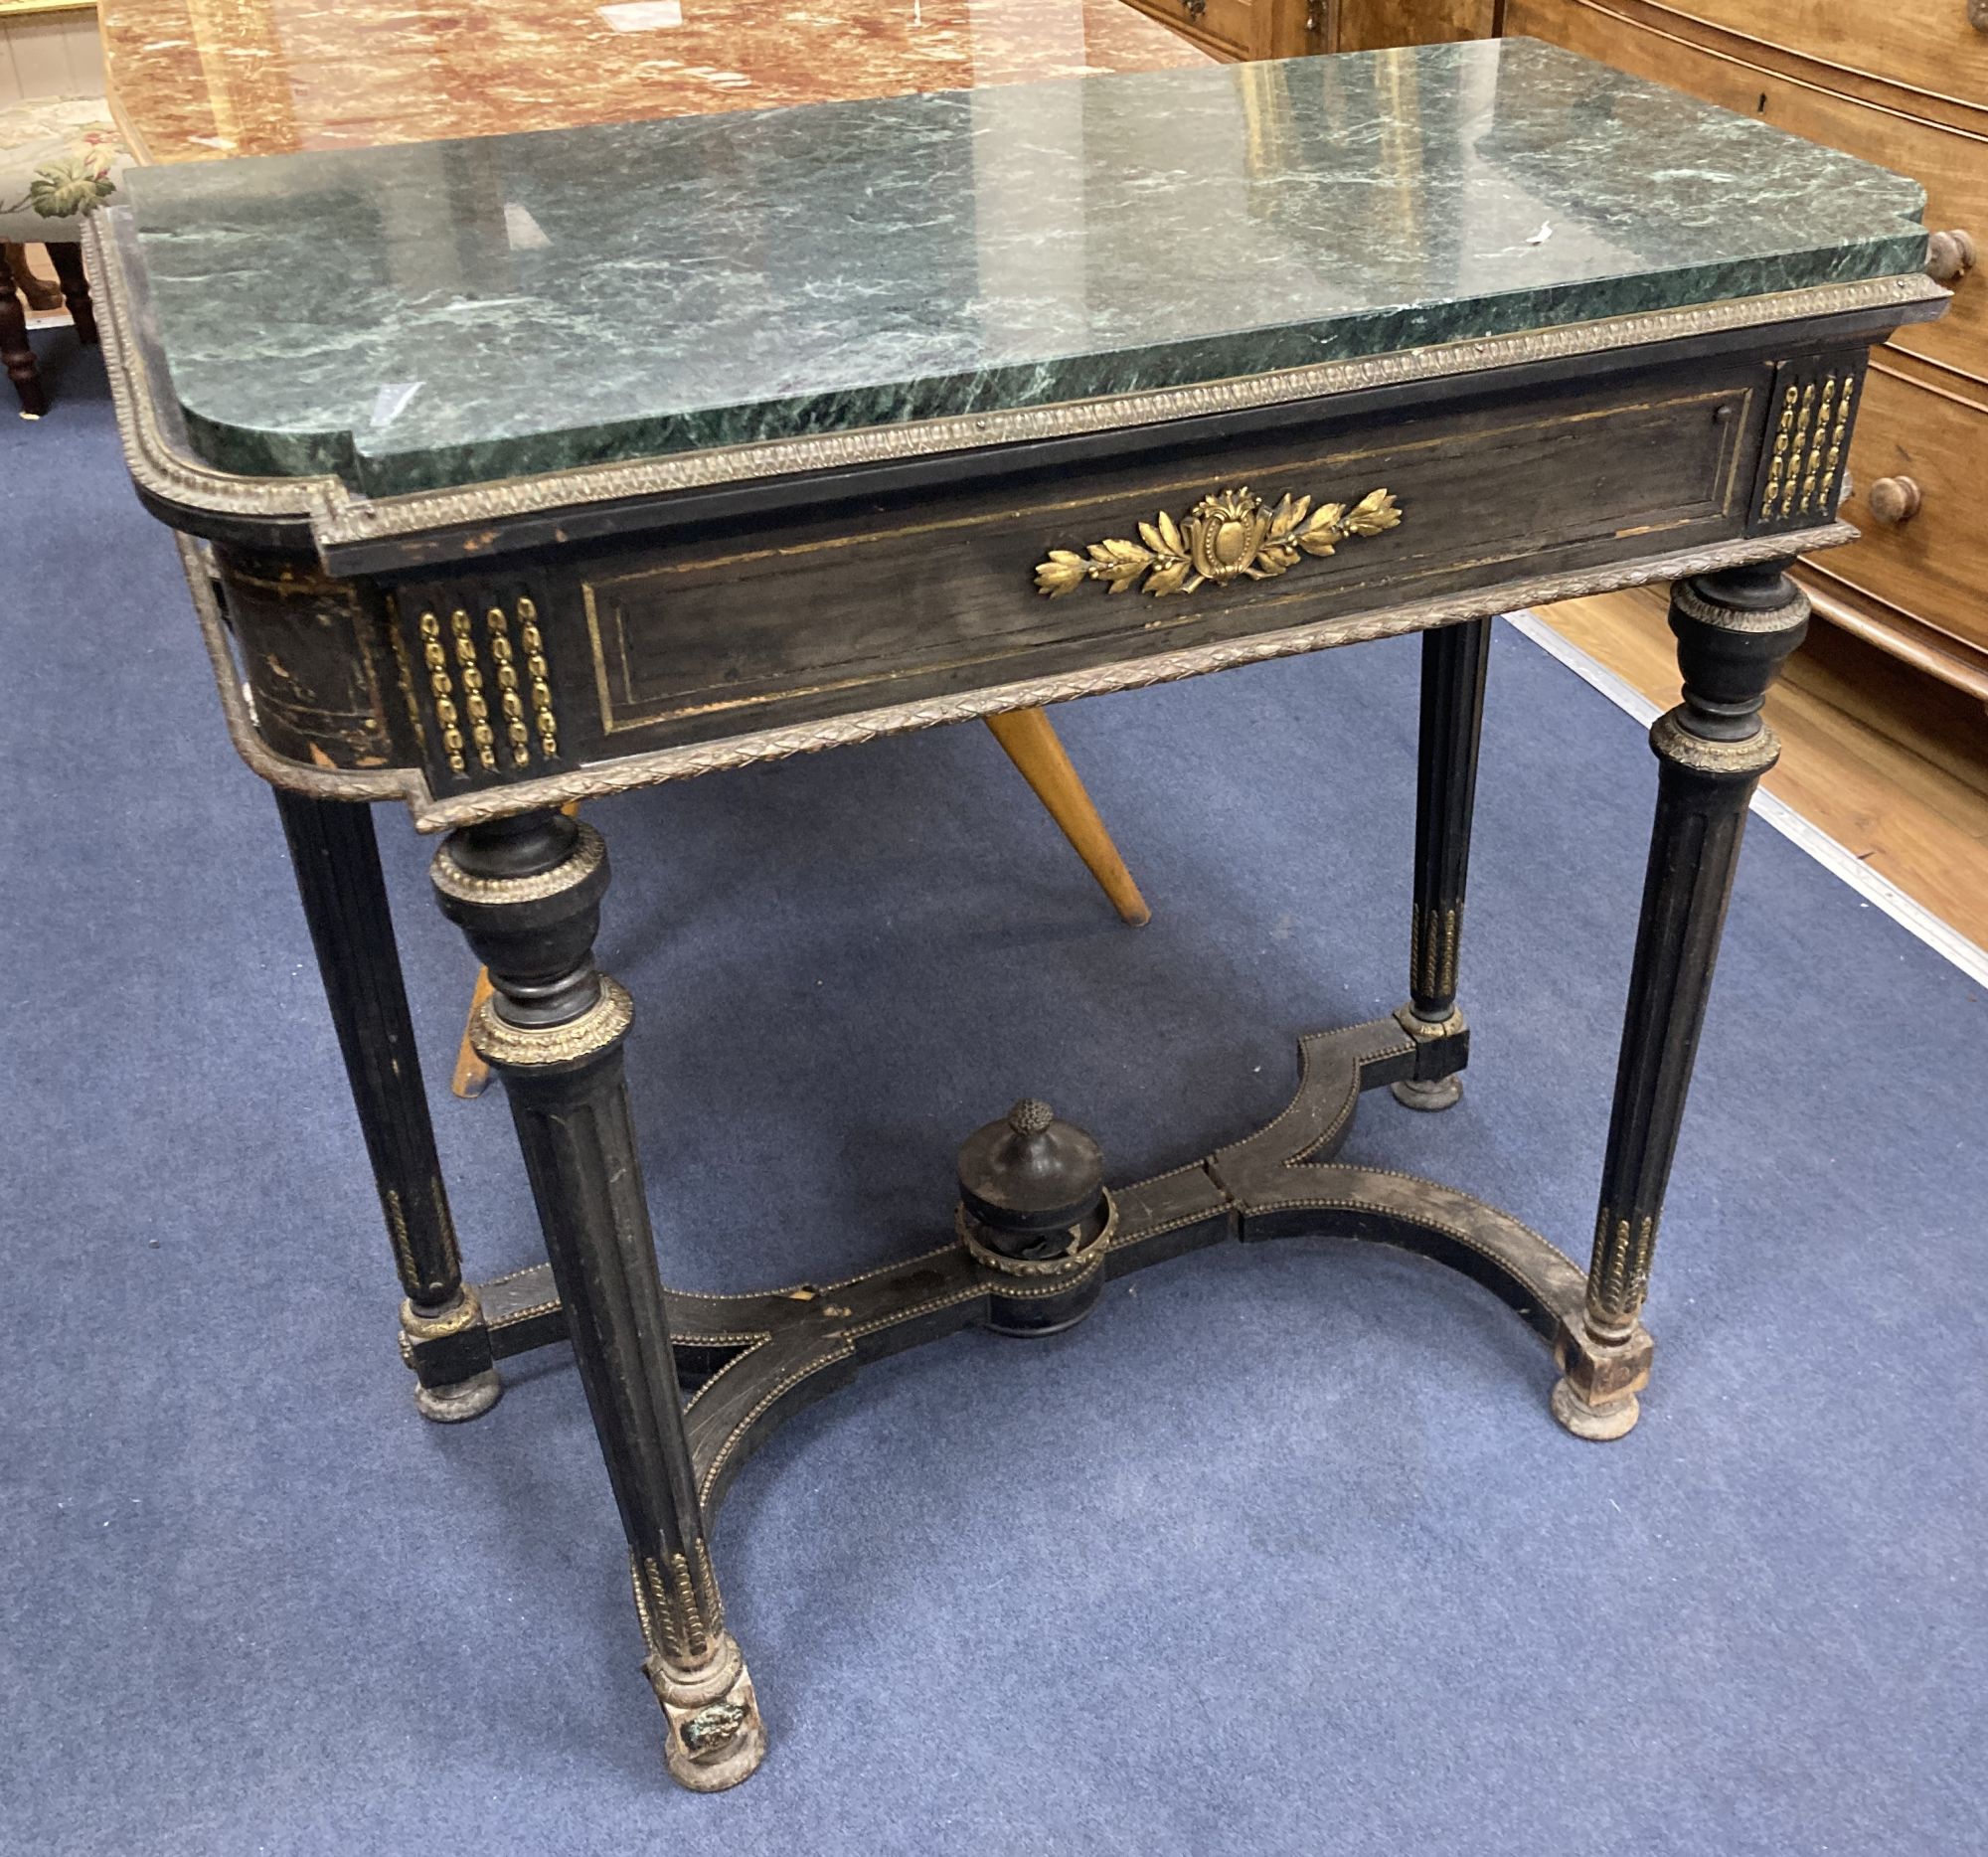 A 19th century French ebonised marble top jardiniere table, width 88cm, depth 48cm, height 86cm